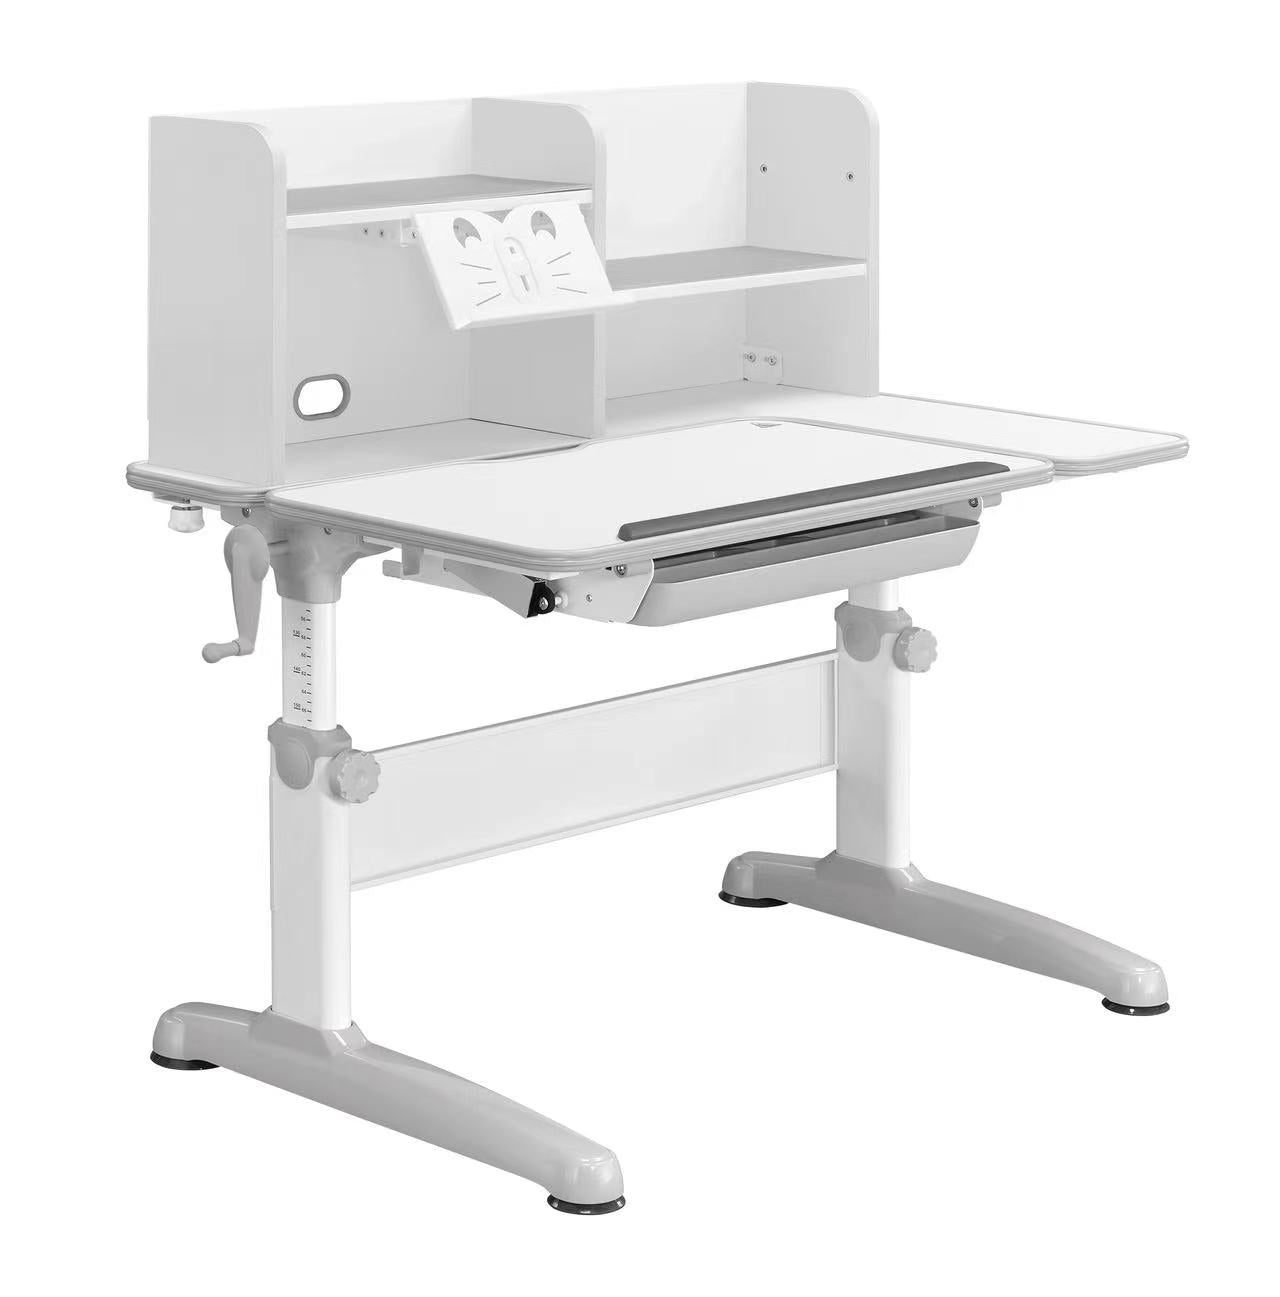 Childrens study desk gray -learning stations that are height-adjustable, tilt-adjustable, and grow with the child – simply ergonomic with chair